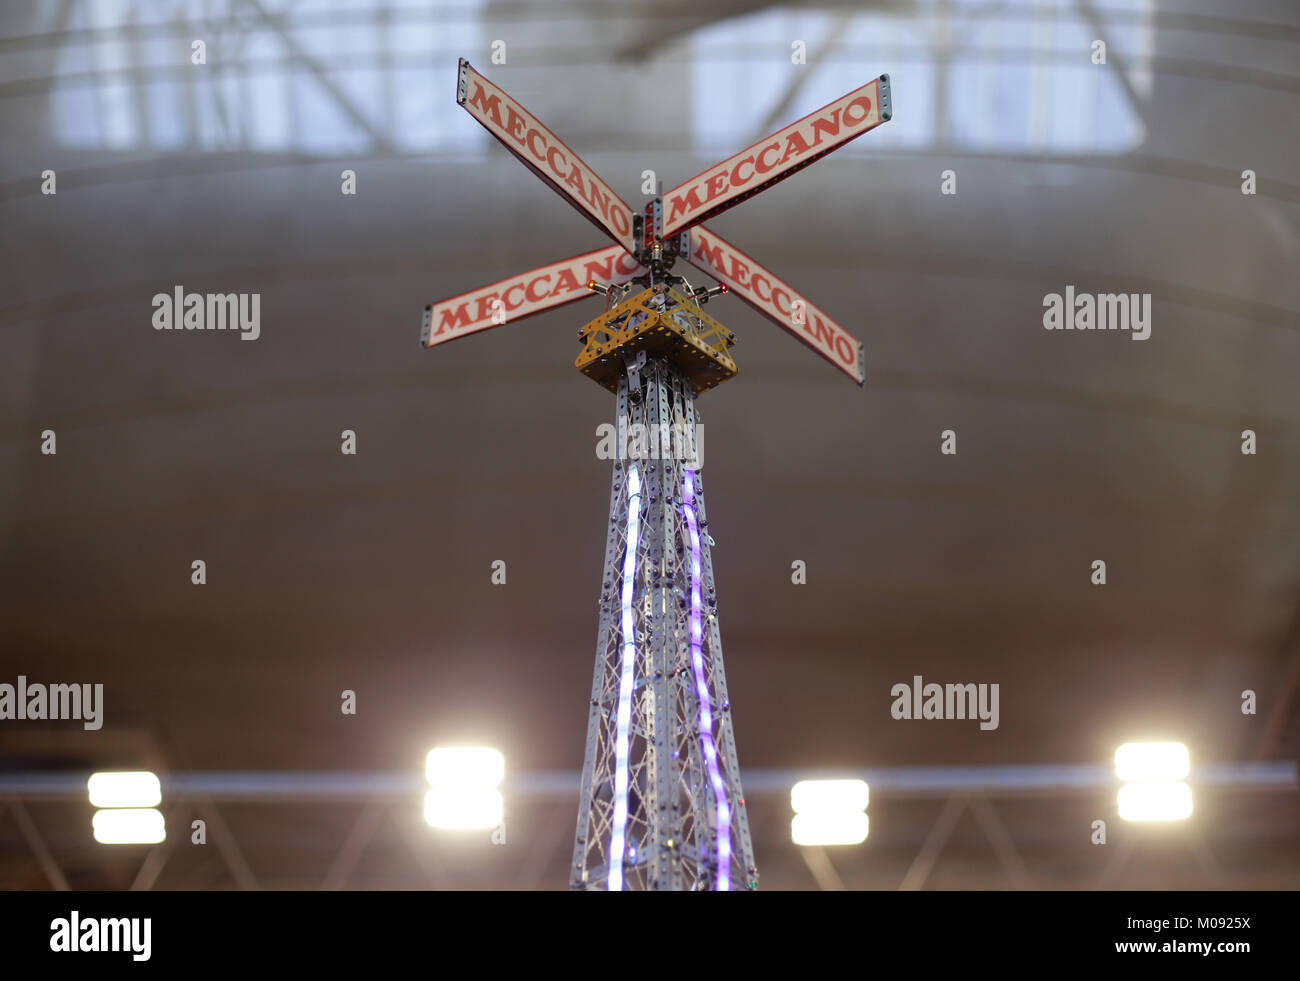 The top of a Meccano model of the Eiffel Tower, during the London Model Engineering exhibition held at Alexandra Palace, London. Stock Photo